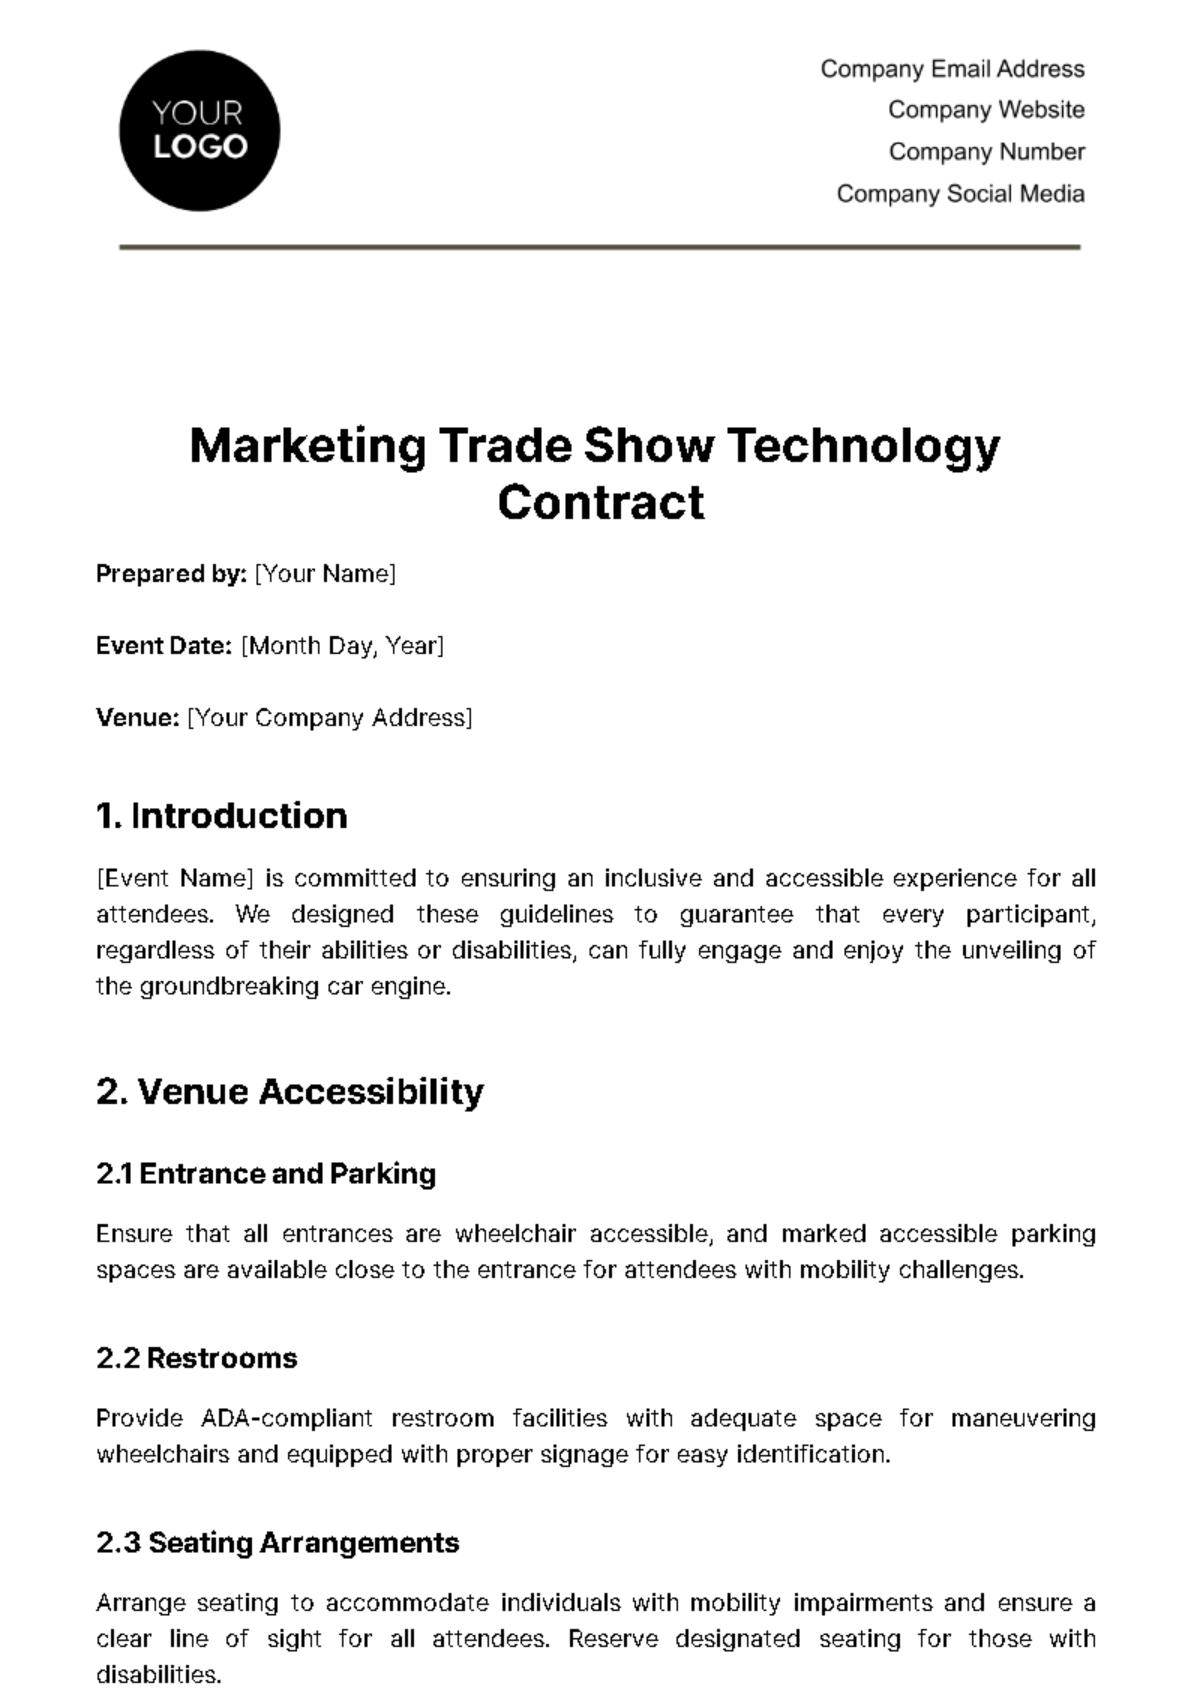 Marketing Trade Show Technology Contract Template